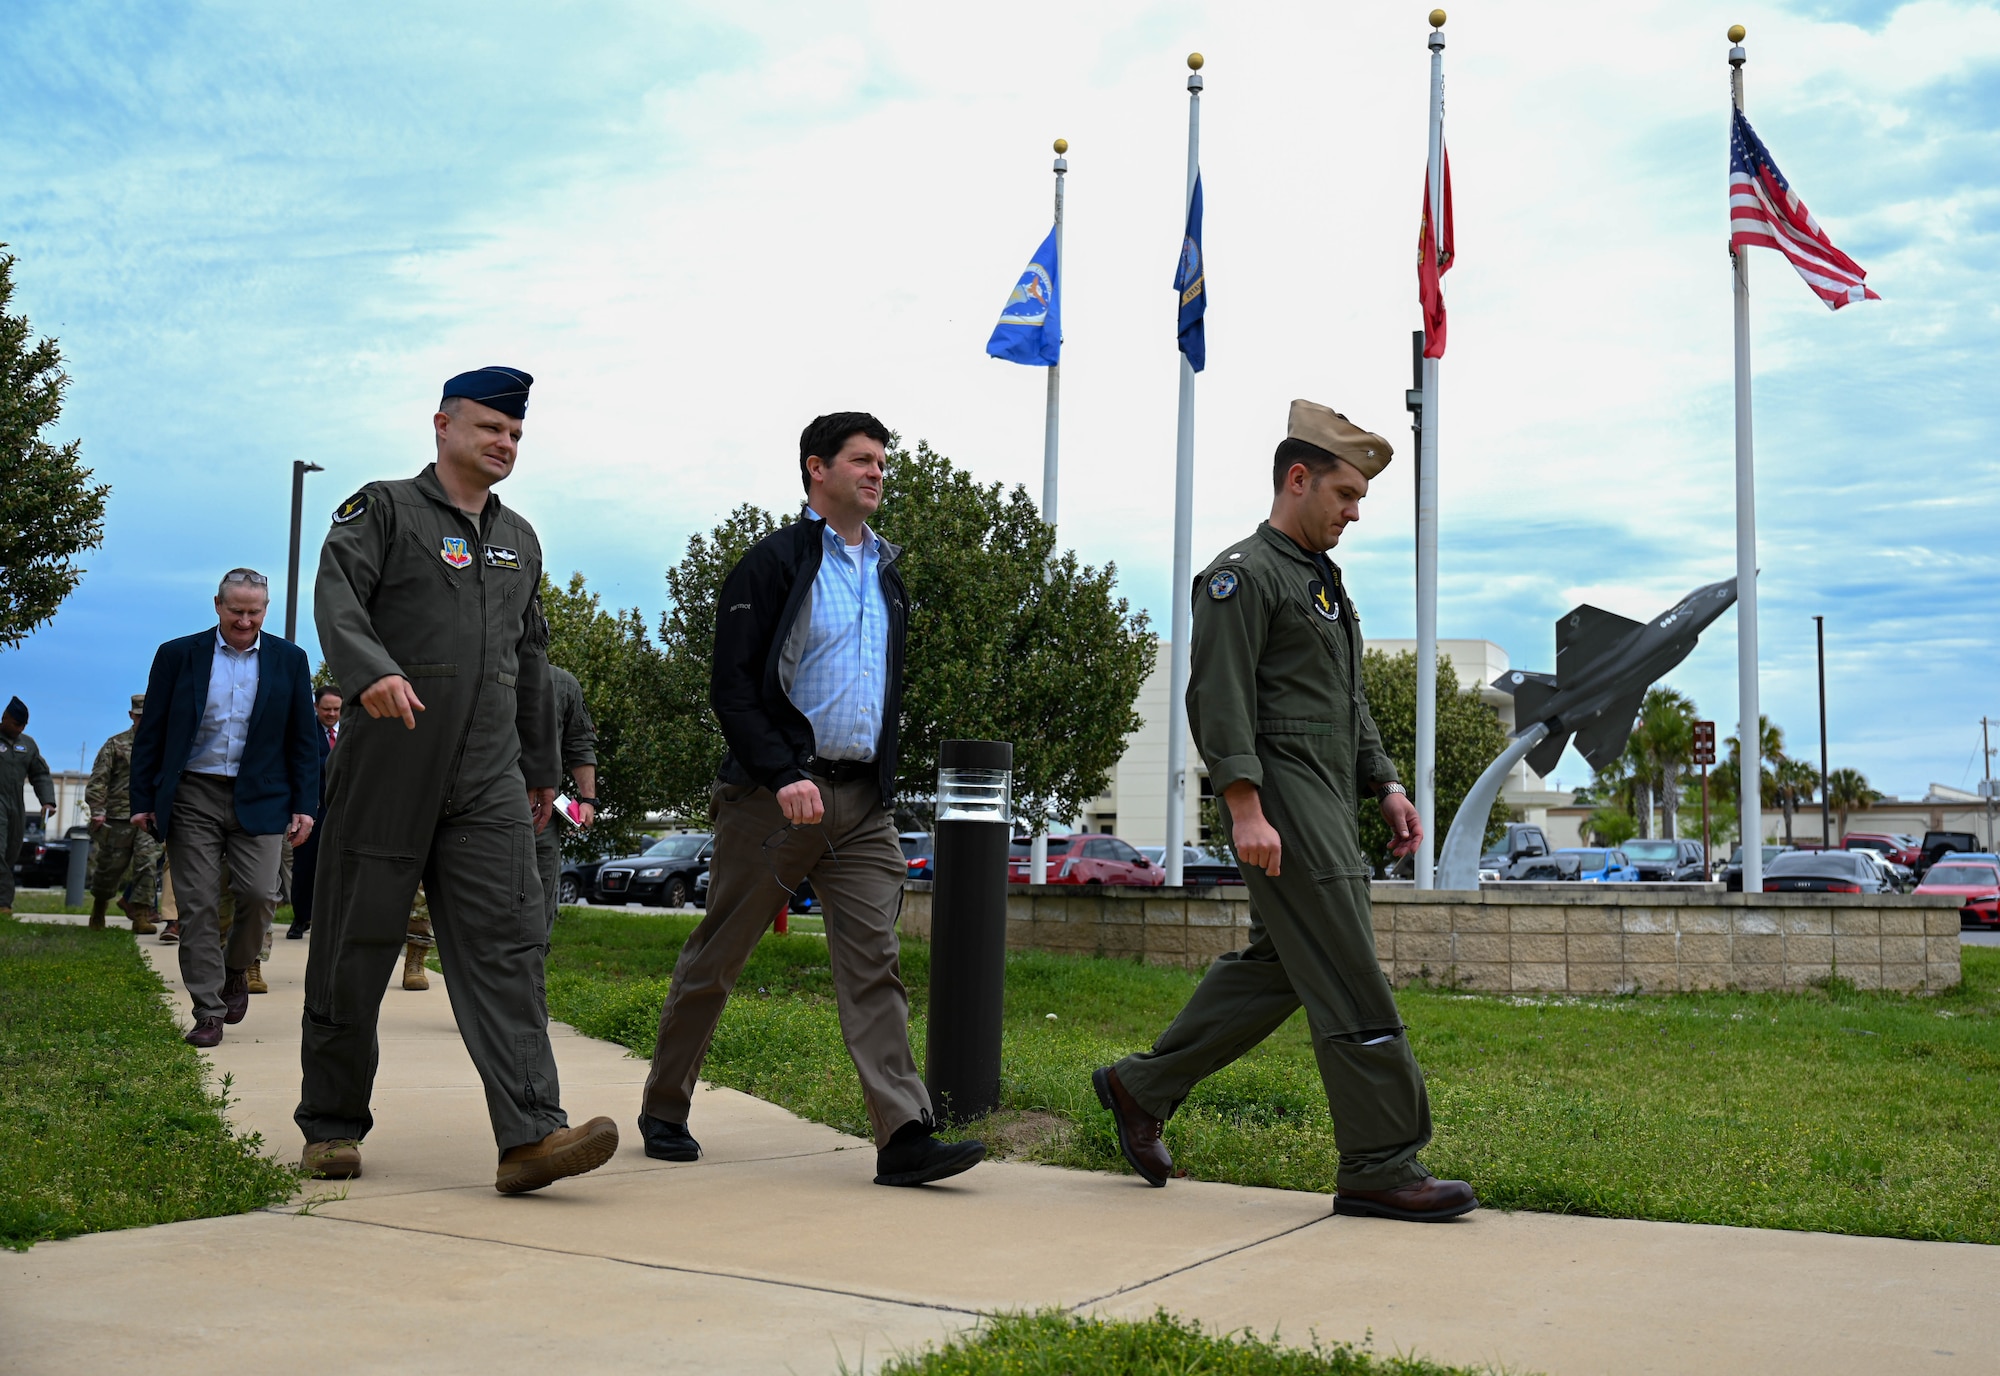 U.S. Air Force Lt. Col. Daron Woodside, 513th Electronic Warfare Squadron commander, left, Dr. John Plumb, Assistant Secretary of Defense for Space Policy, center, and U.S. Navy Cmdr. Alexander Sandroni, 513th EWS deputy commander, right, walk outside the 513th EWS building before a series of briefings at Eglin Air Force Base, Fla., March 11, 2024. Plumb visited to the 350th Spectrum Warfare Wing to learn about its mission to deliver adaptive and cutting-edge electromagnetic spectrum capabilities that provide the warfighter a tactical and strategic competitive advantage and freedom to attack, maneuver, and defend. (U.S. Air Force photo by Capt. Benjamin Aronson)